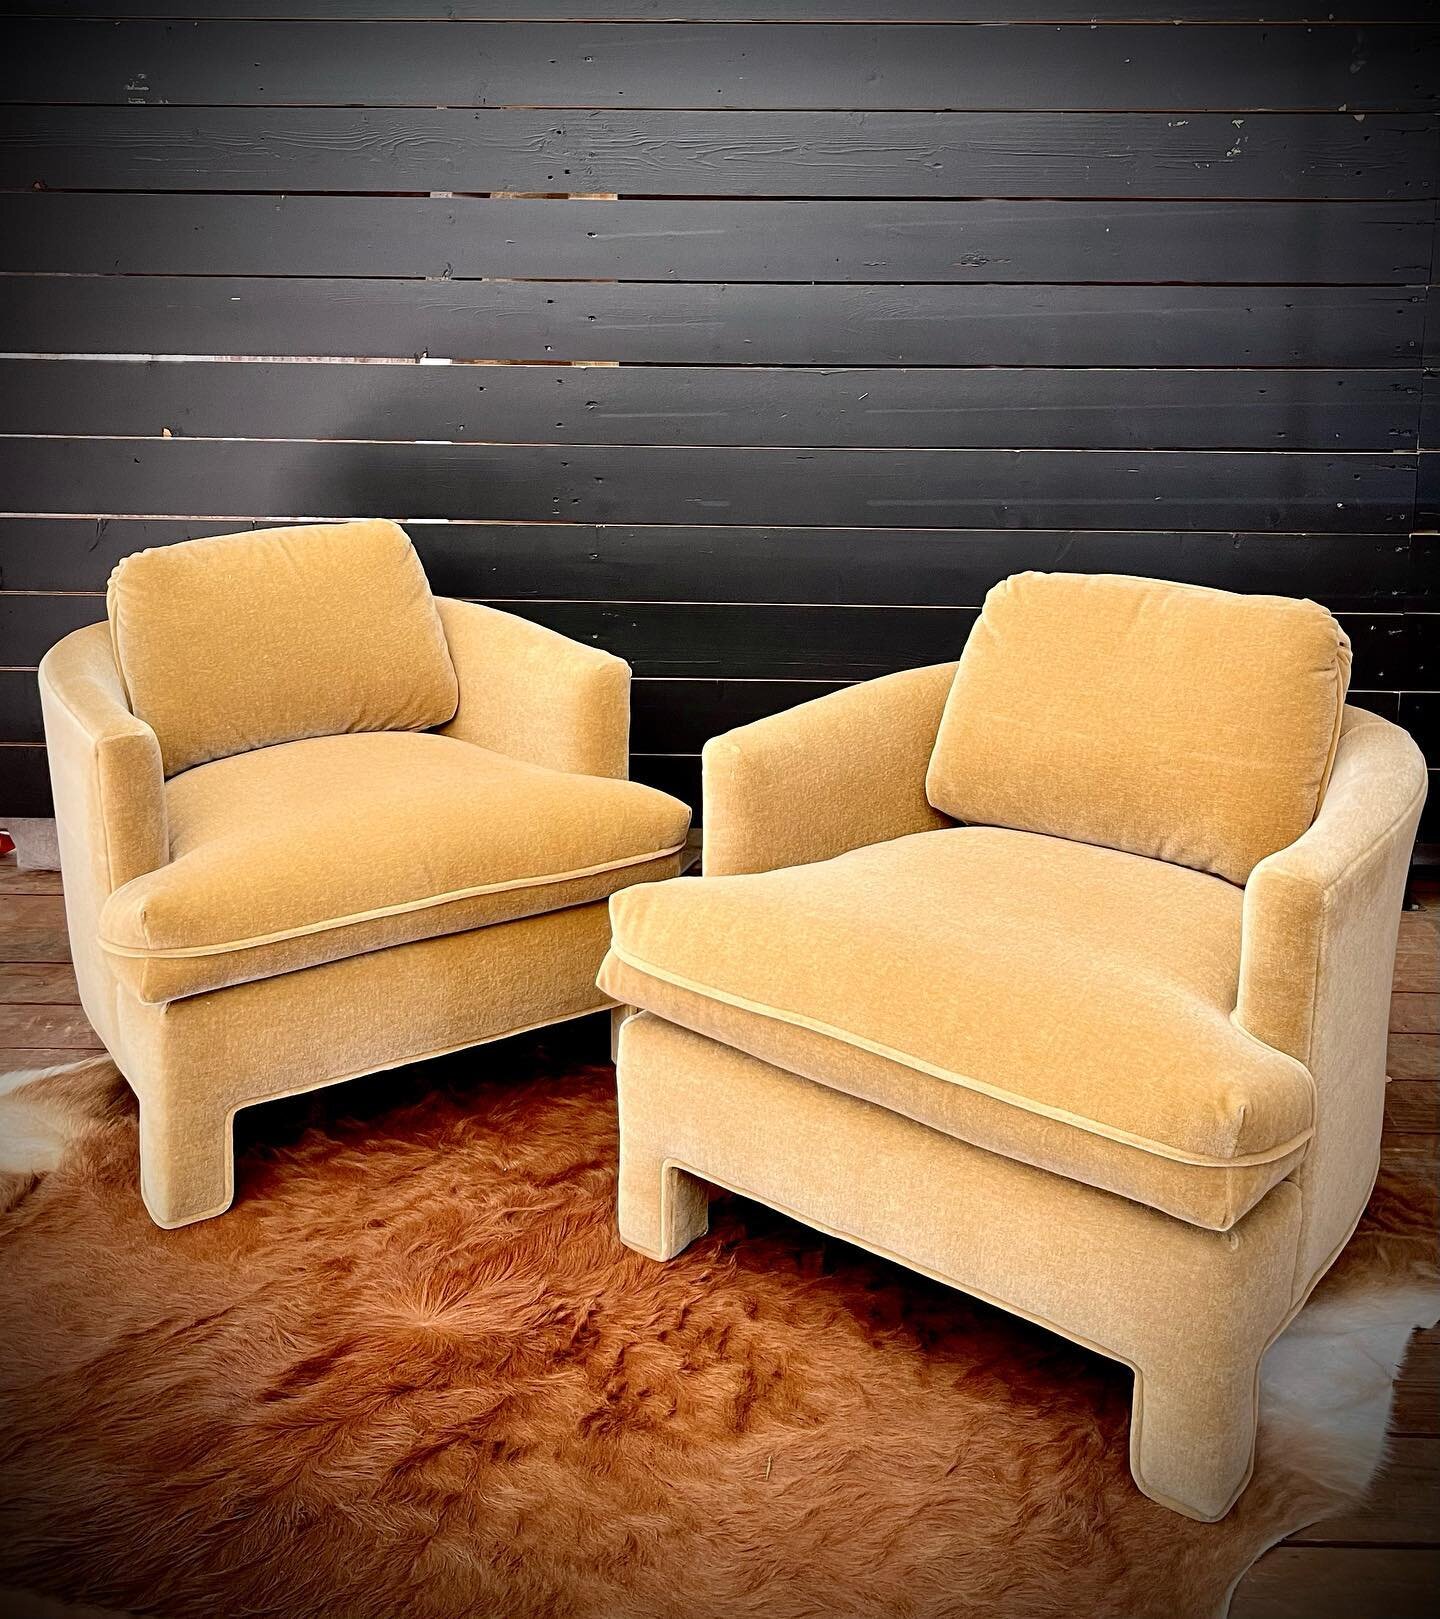 Mohair Parson Style Club Chairs #availablefromthem 
.
Nationwide shipping available. 
.
.
.
.
.
.
.
.
.
.
.
.
.
.

#downtownmckinney #roundtop #vintagestyle #eclecticstyle #vintage #antiques #roundtoptexas #interiordesign #dallasdesign #beautifulfind